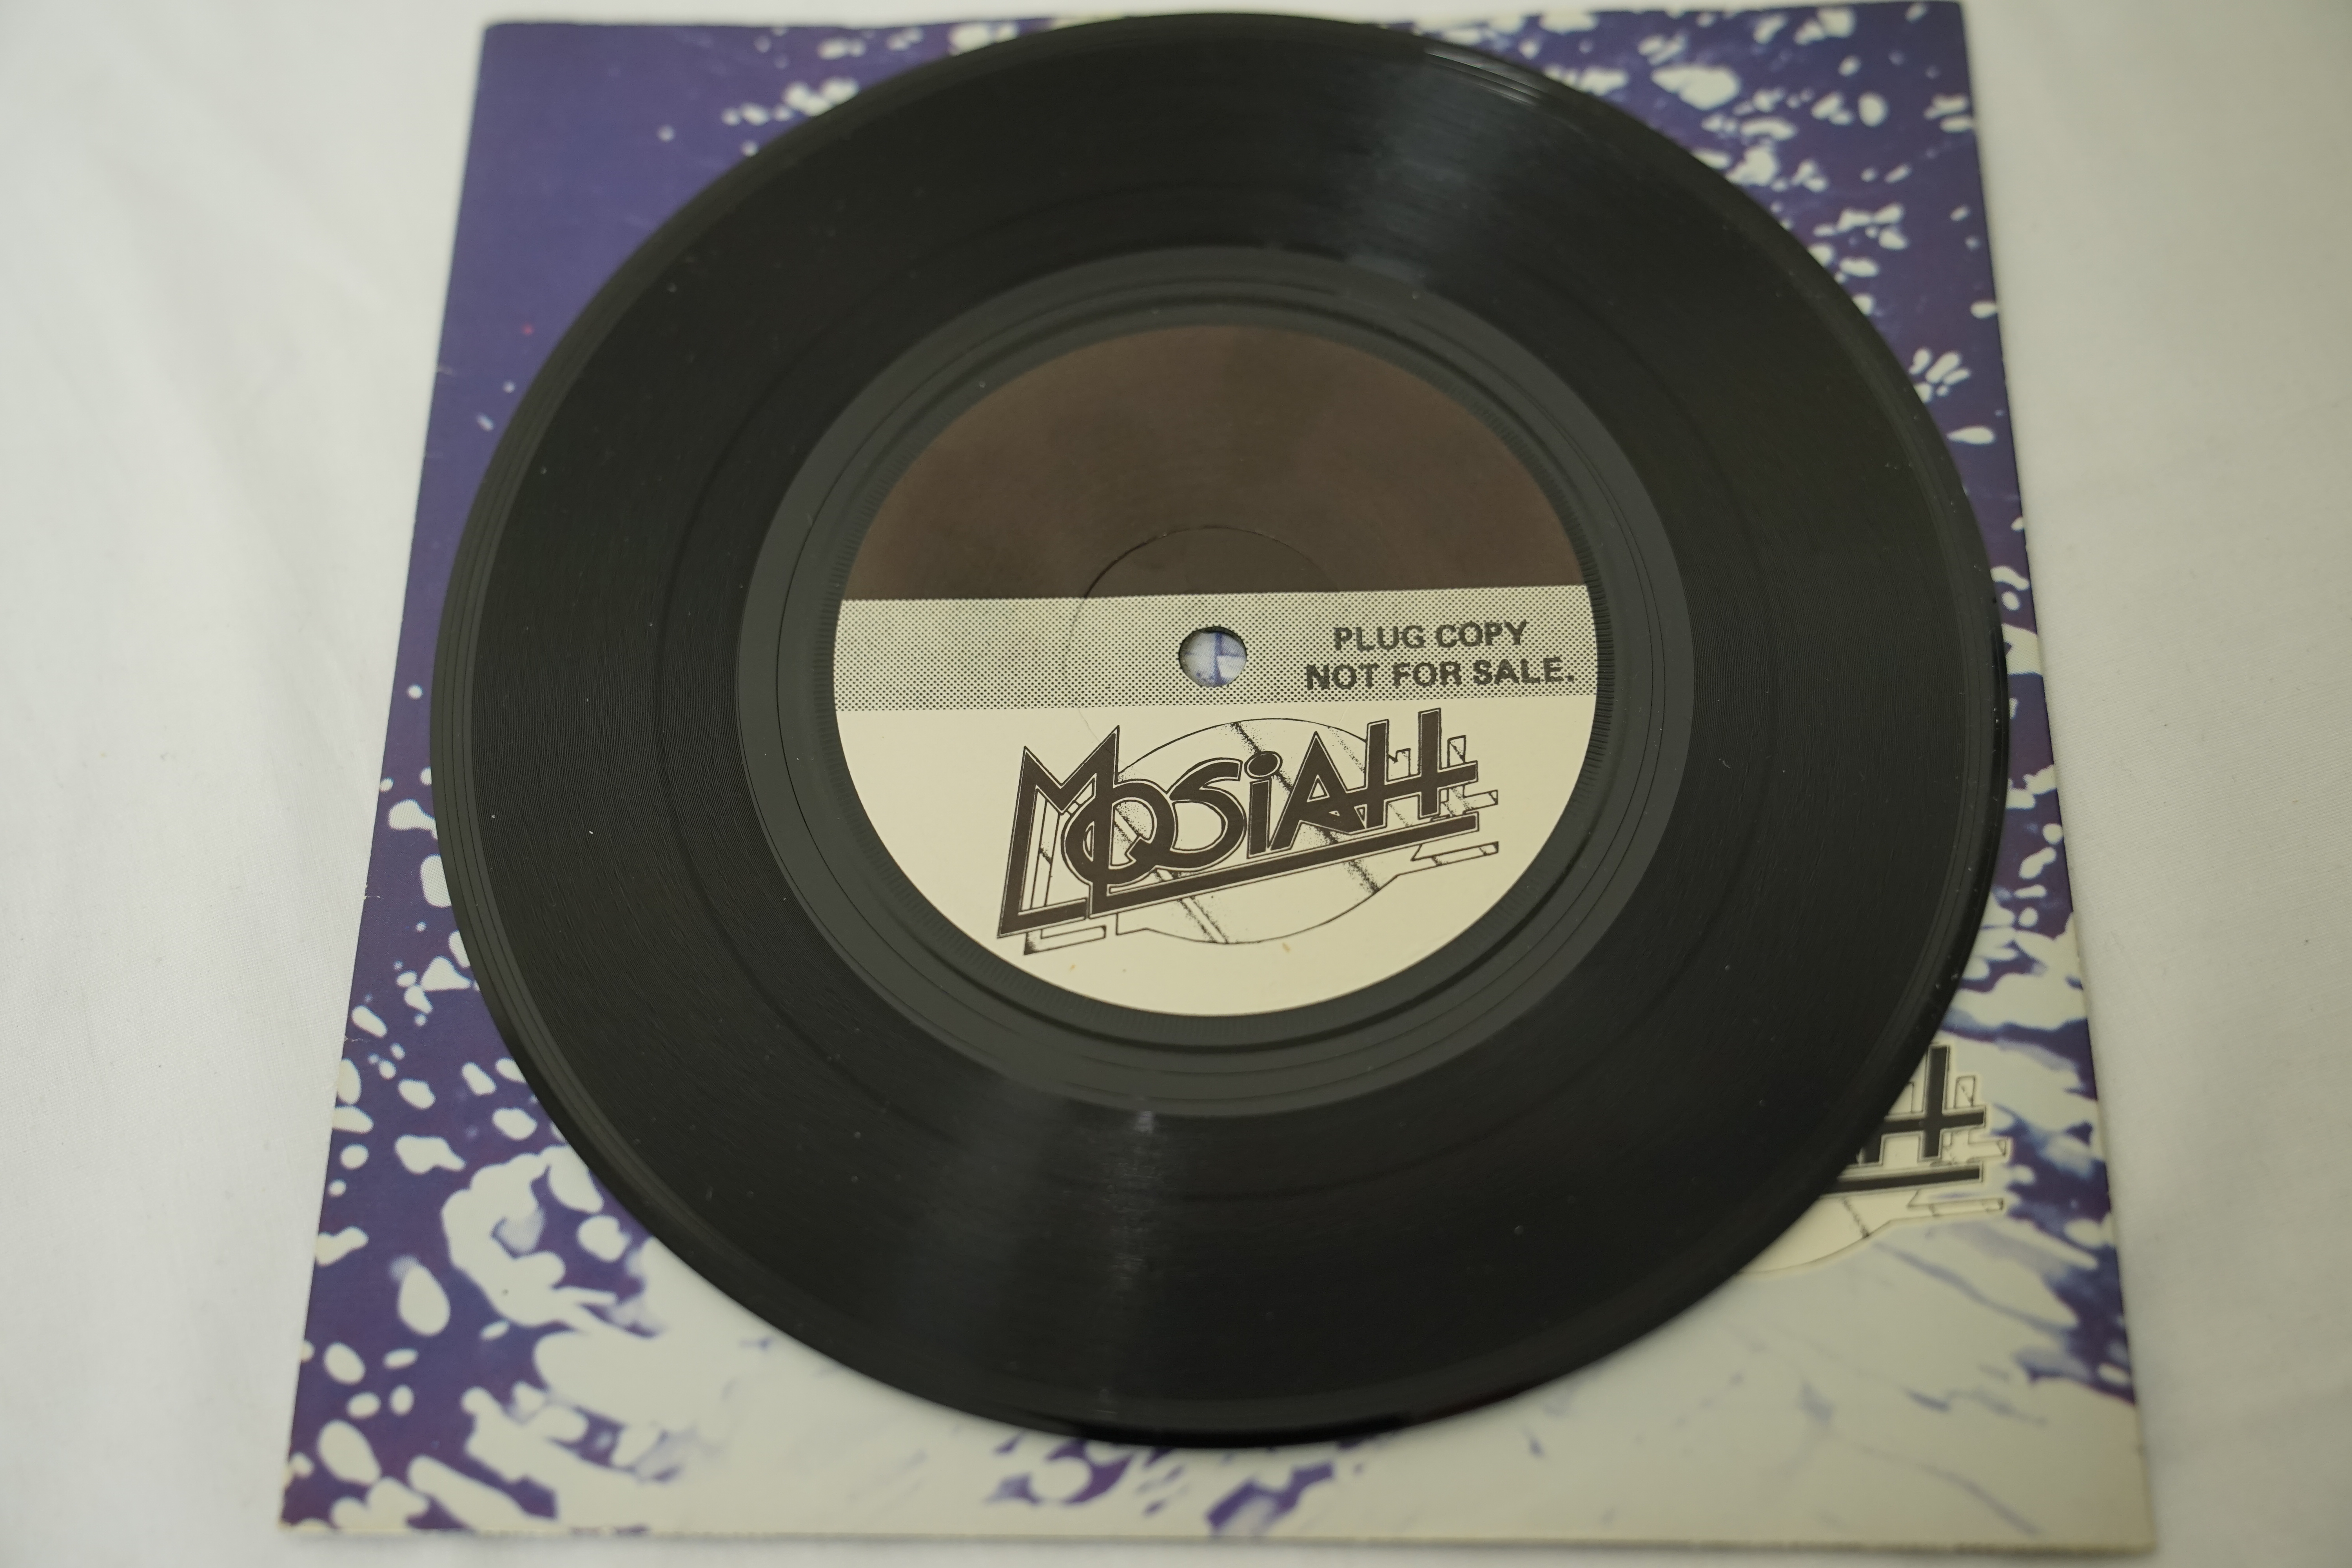 Vinyl - Mosiah - Channel Dub / Rumours Of War (Big Records SOLD 6 DEMO PROMO) NM archive - Image 3 of 4